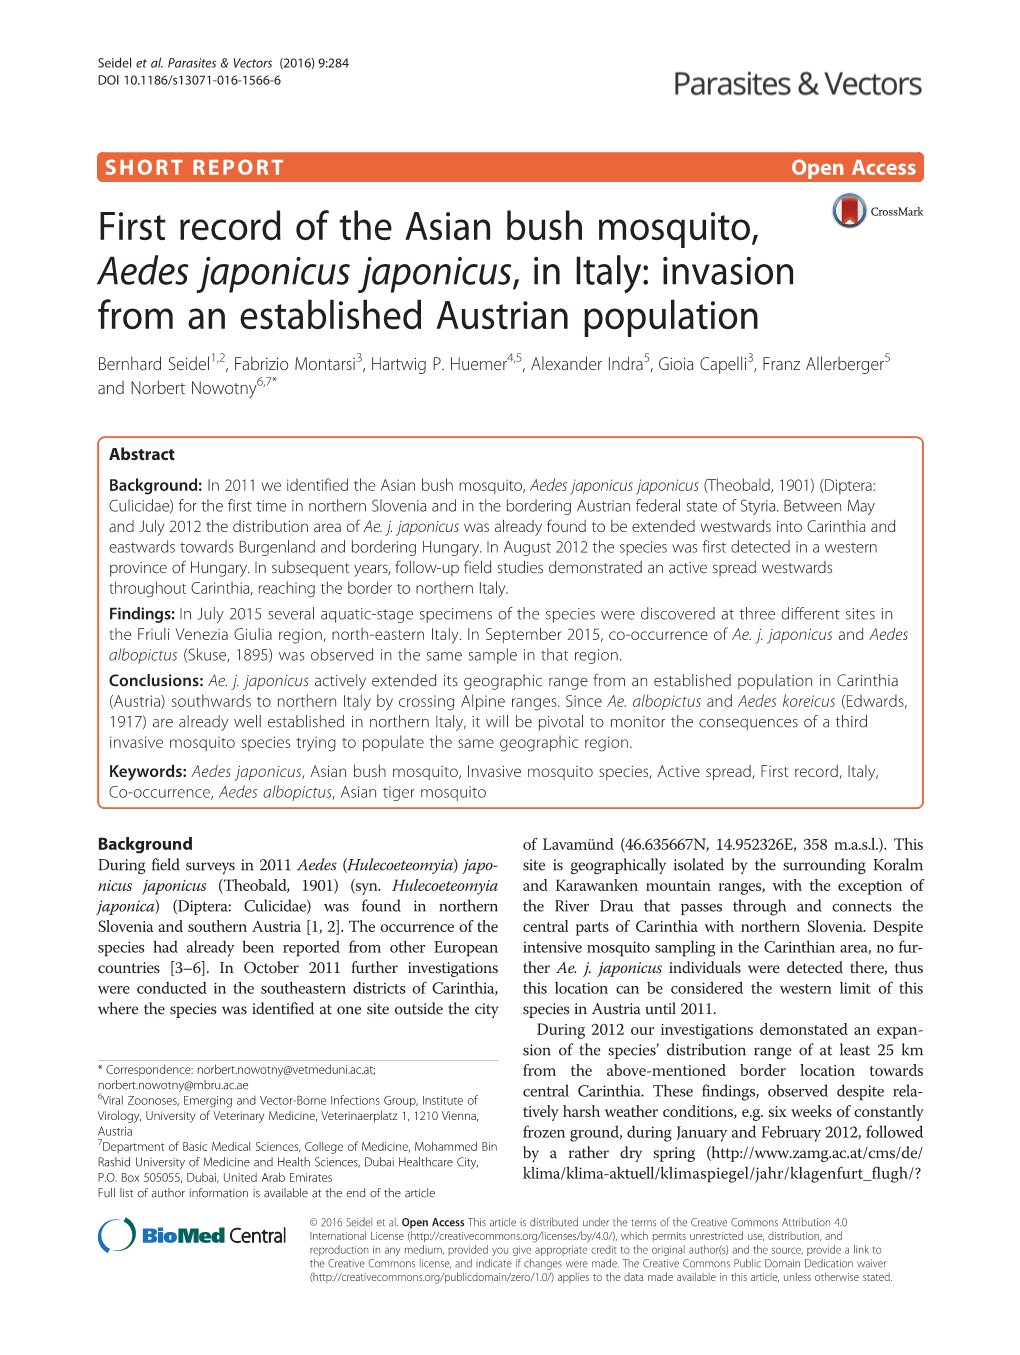 First Record of the Asian Bush Mosquito, Aedes